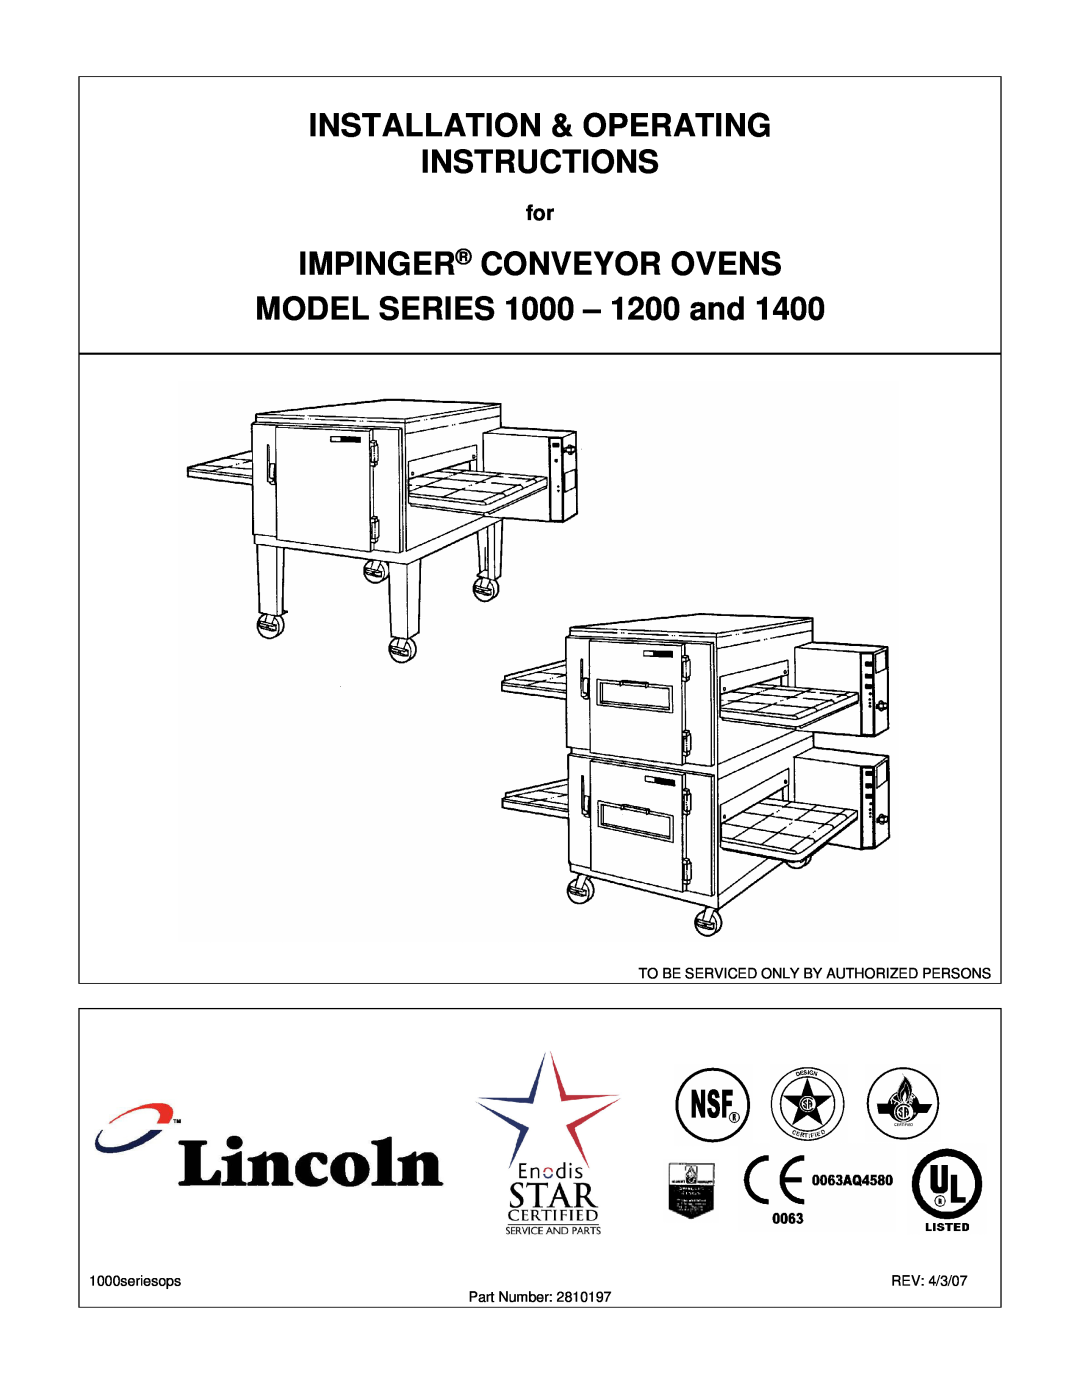 Lincoln 1200, 1400, 1000 operating instructions Installation & Operating Instructions, Impinger Conveyor Ovens 